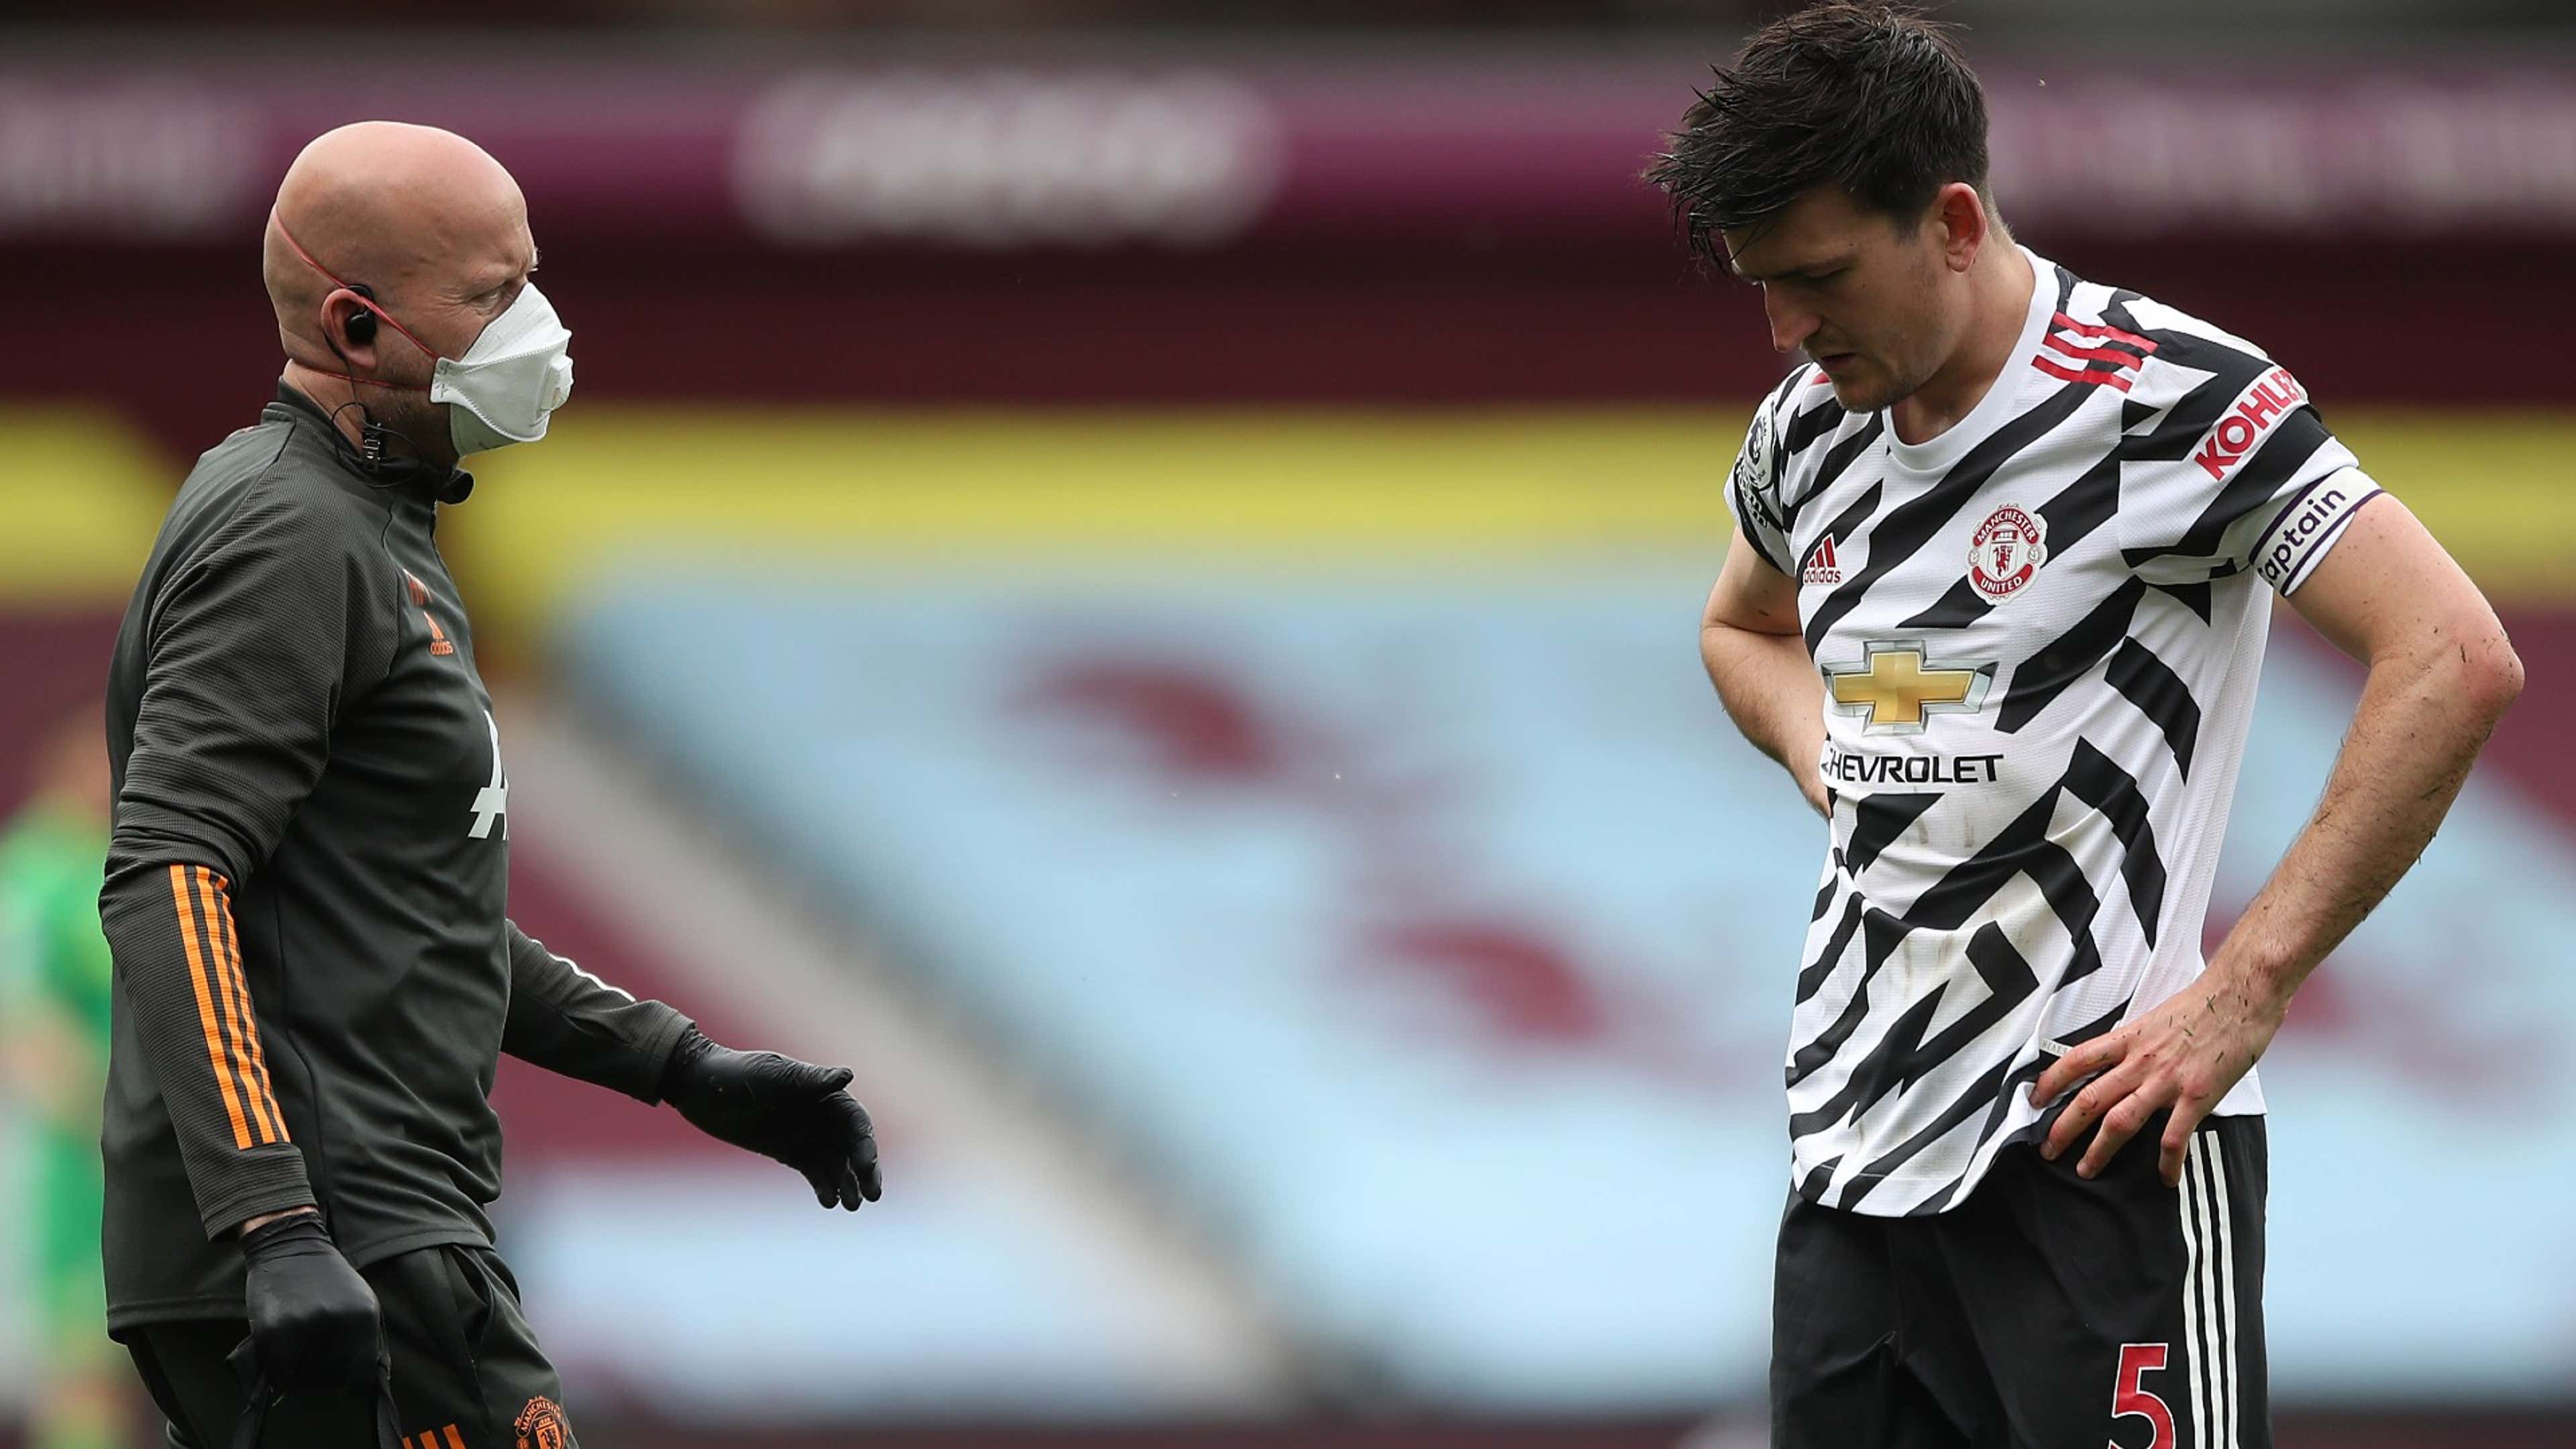 Maguire breaks one Man Utd record and falls short of another as Red Devils  captain forced off vs Aston Villa | Goal.com